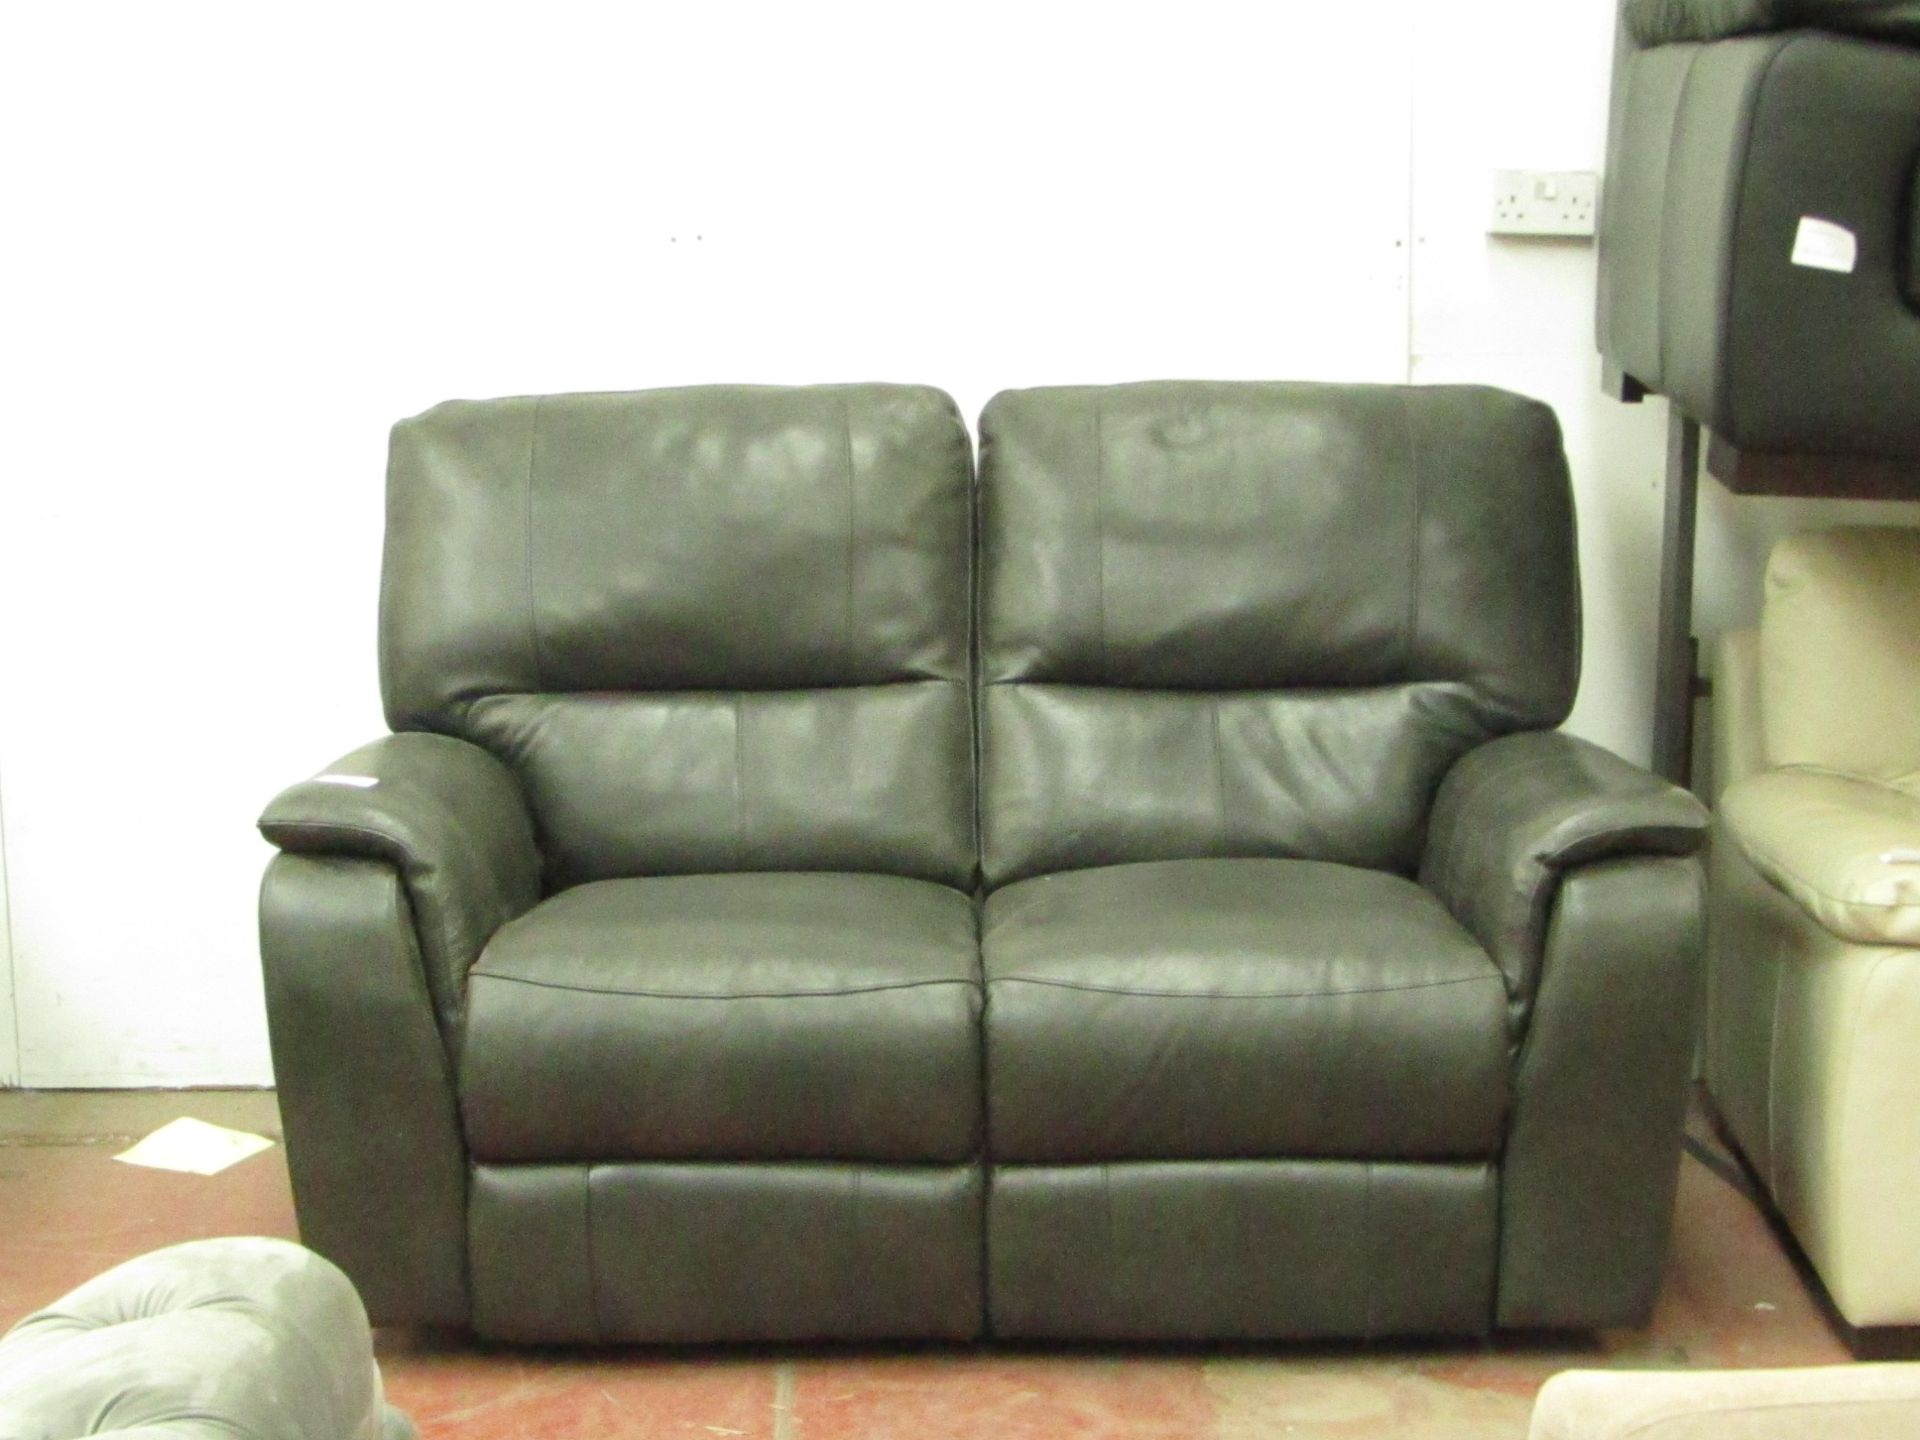 Costco 2 seater manual reclining sofa, the reclining part is working and the sofa has no major